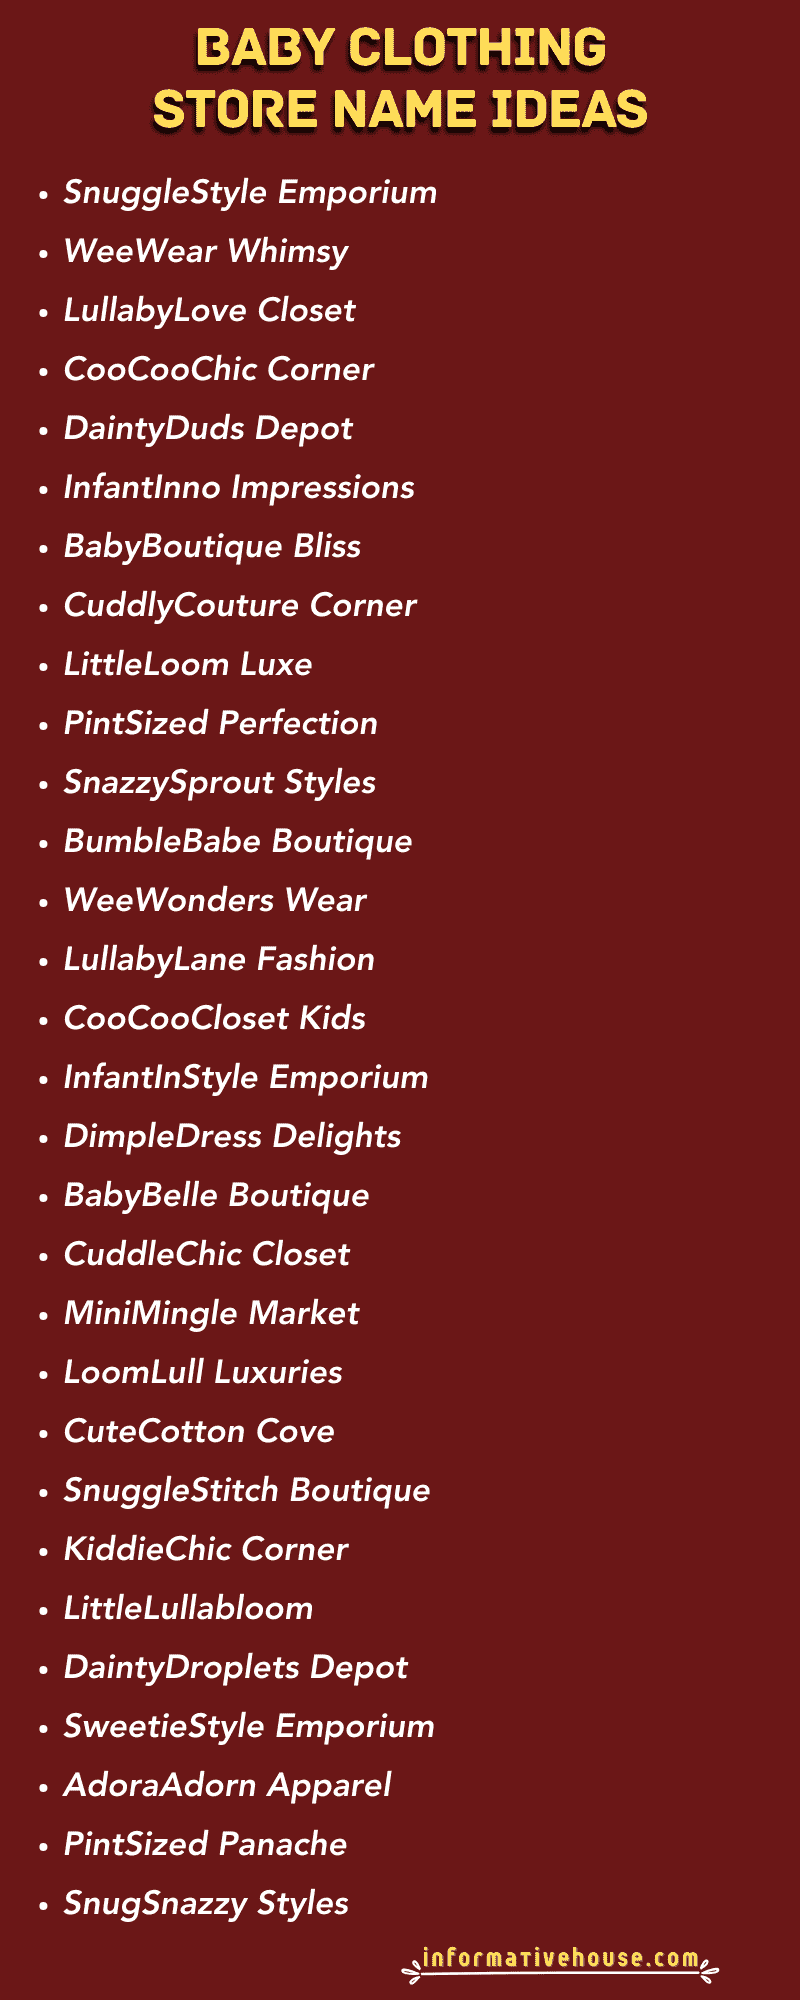 Baby Clothing Store Name Ideas for startup